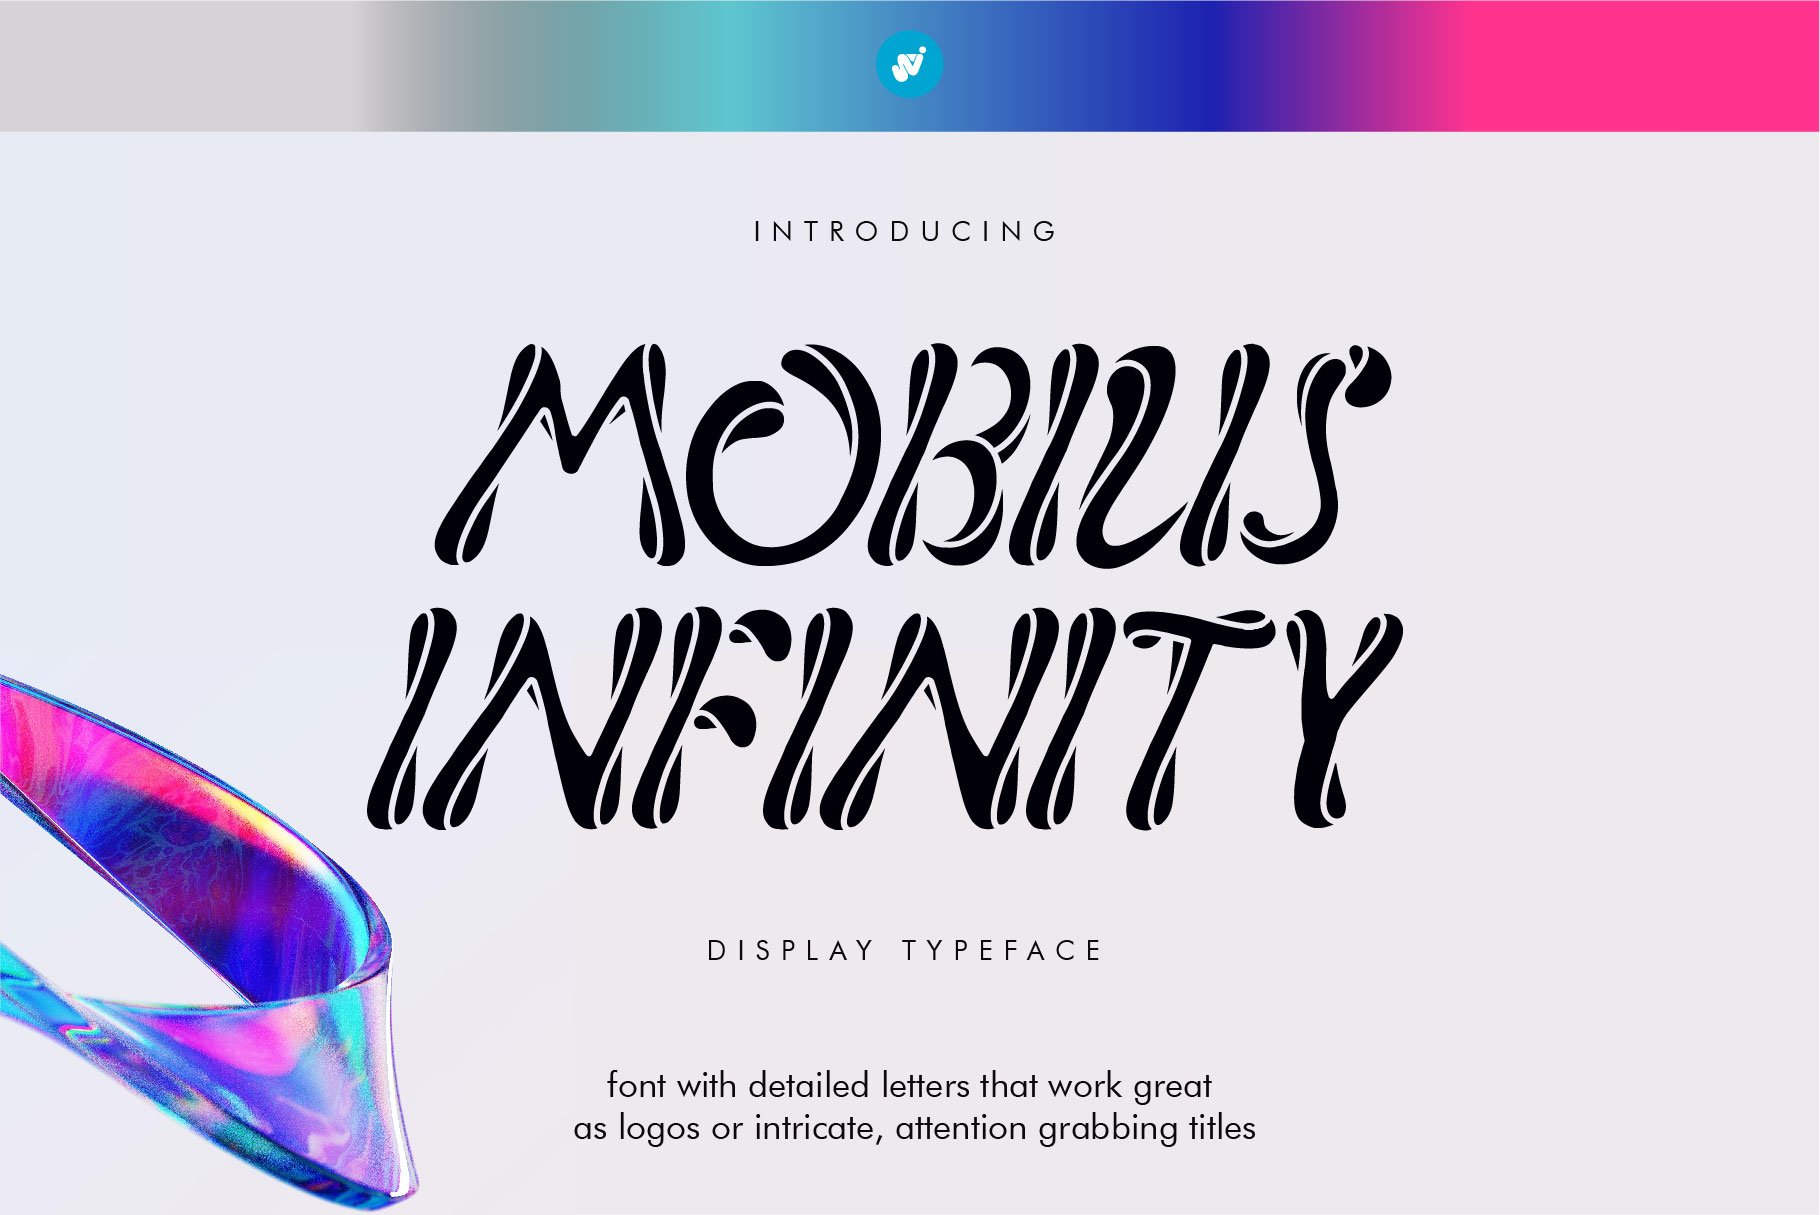 Mobius Infinity Logo Font cover image.